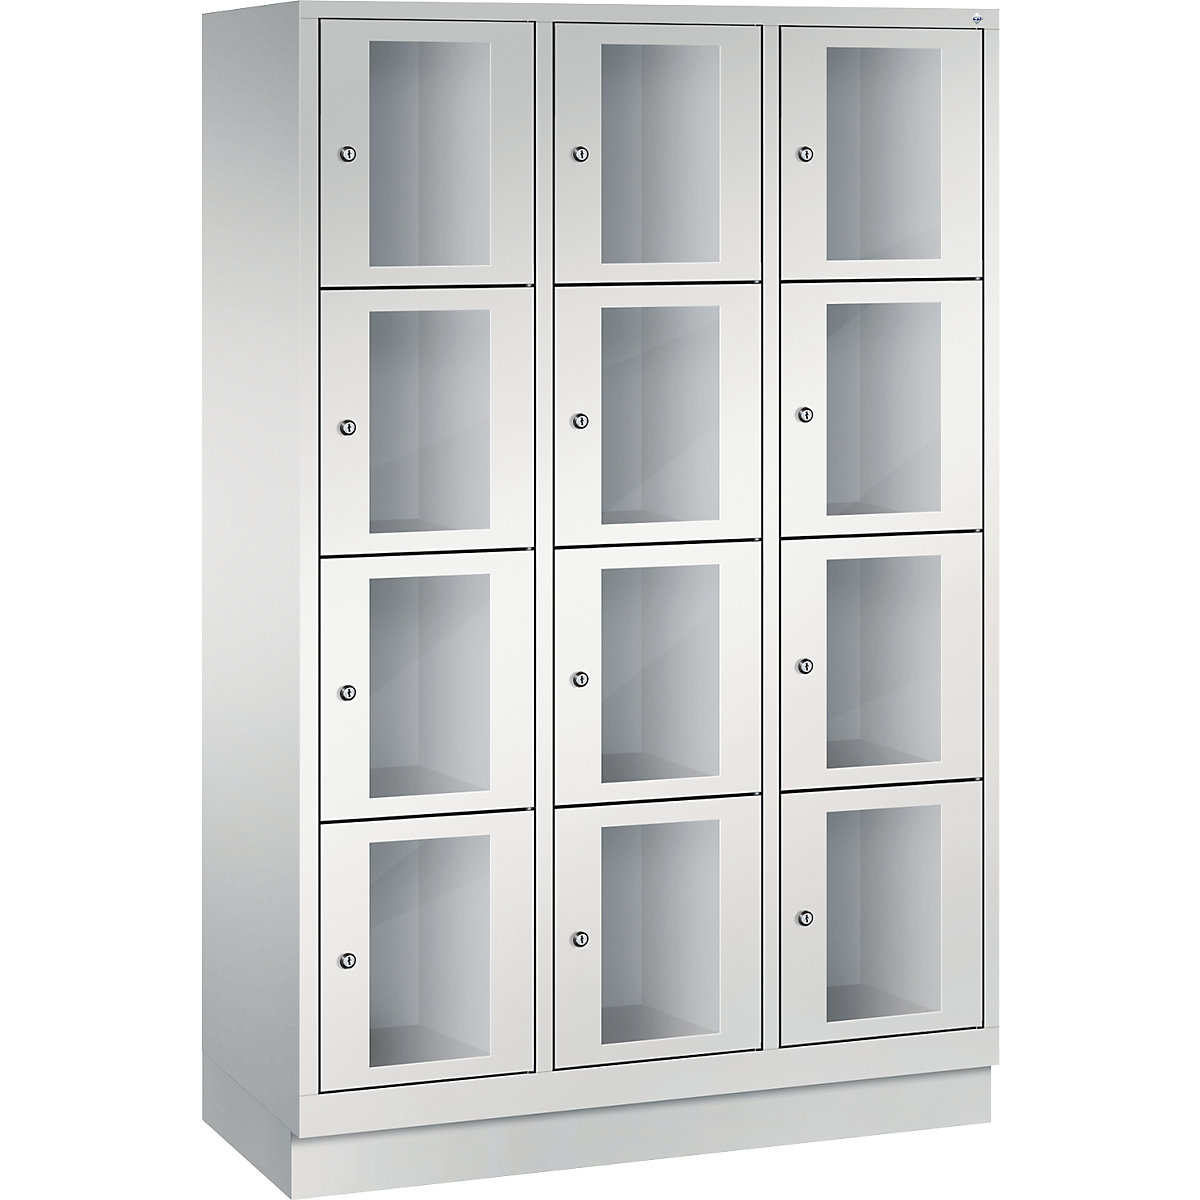 C+P – CLASSIC locker unit, compartment height 375 mm, with plinth, 12 compartments, width 1200 mm, light grey door